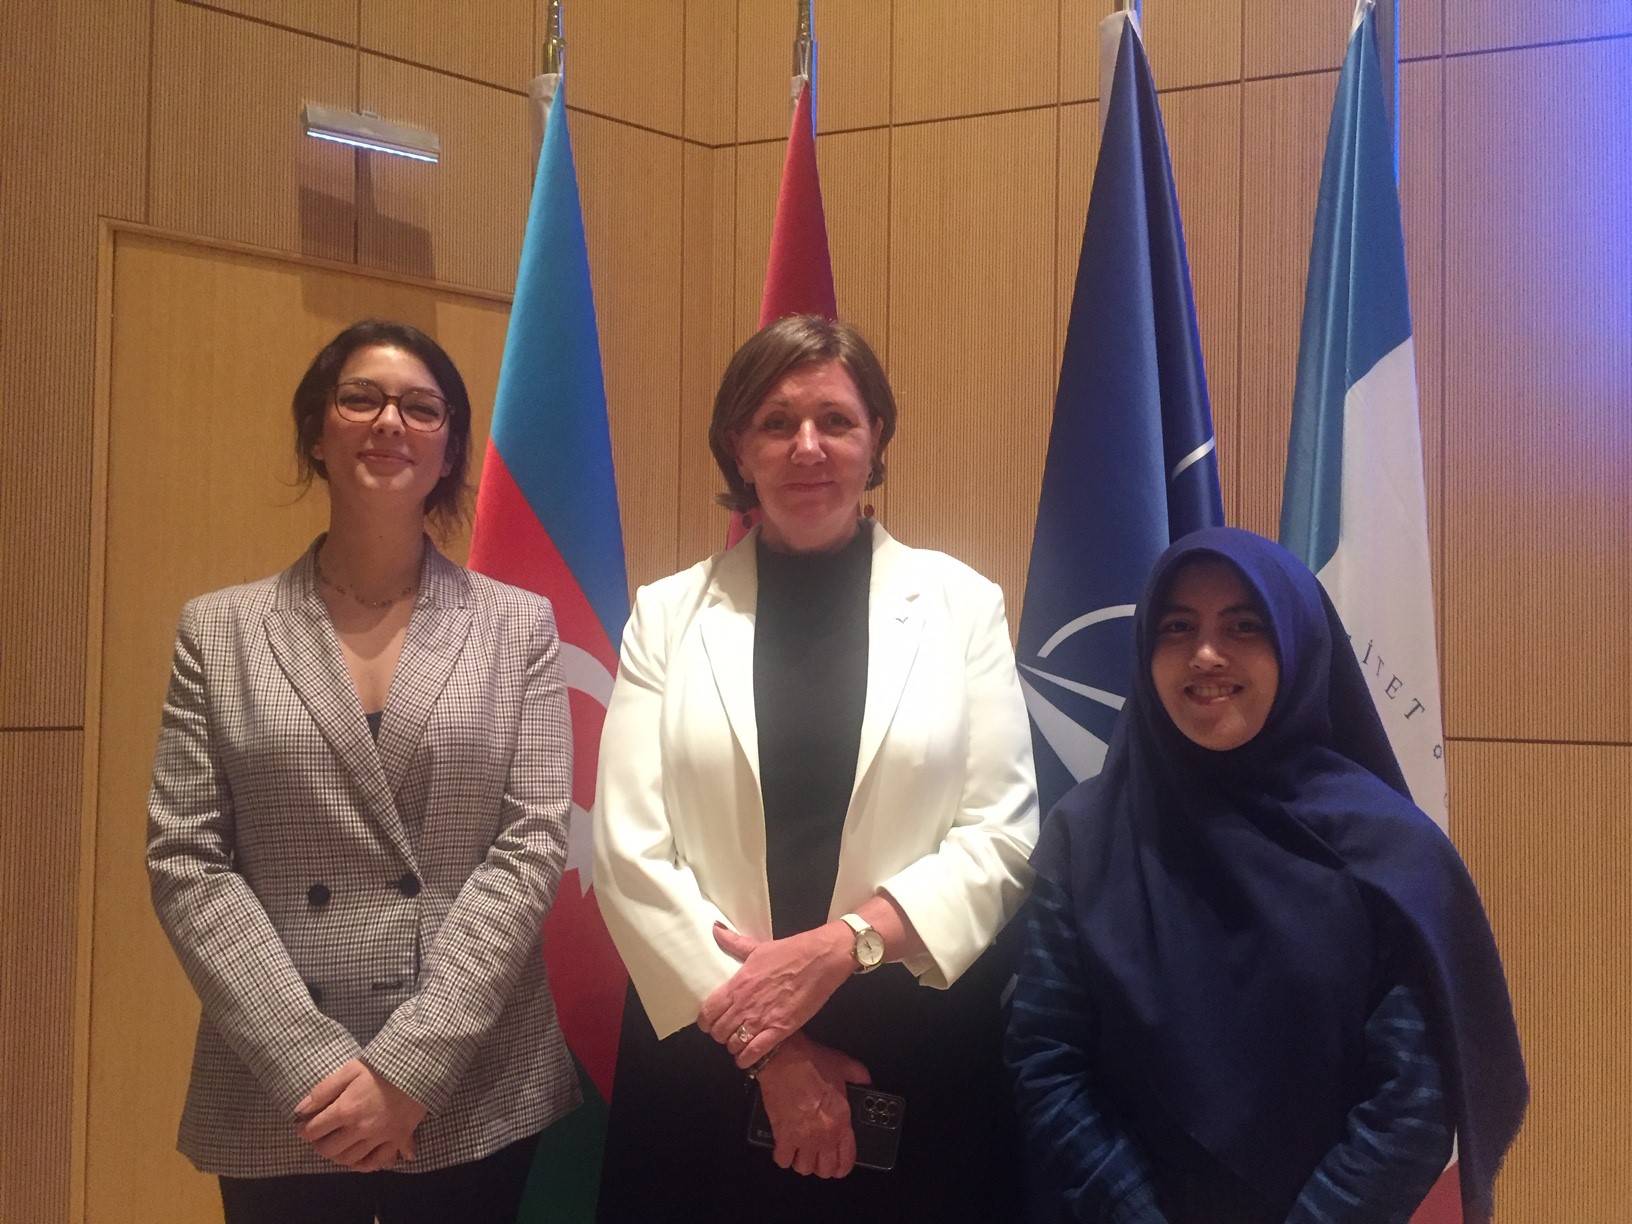 Nailekhanim scholarship students at "Women, Peace and Security" conference